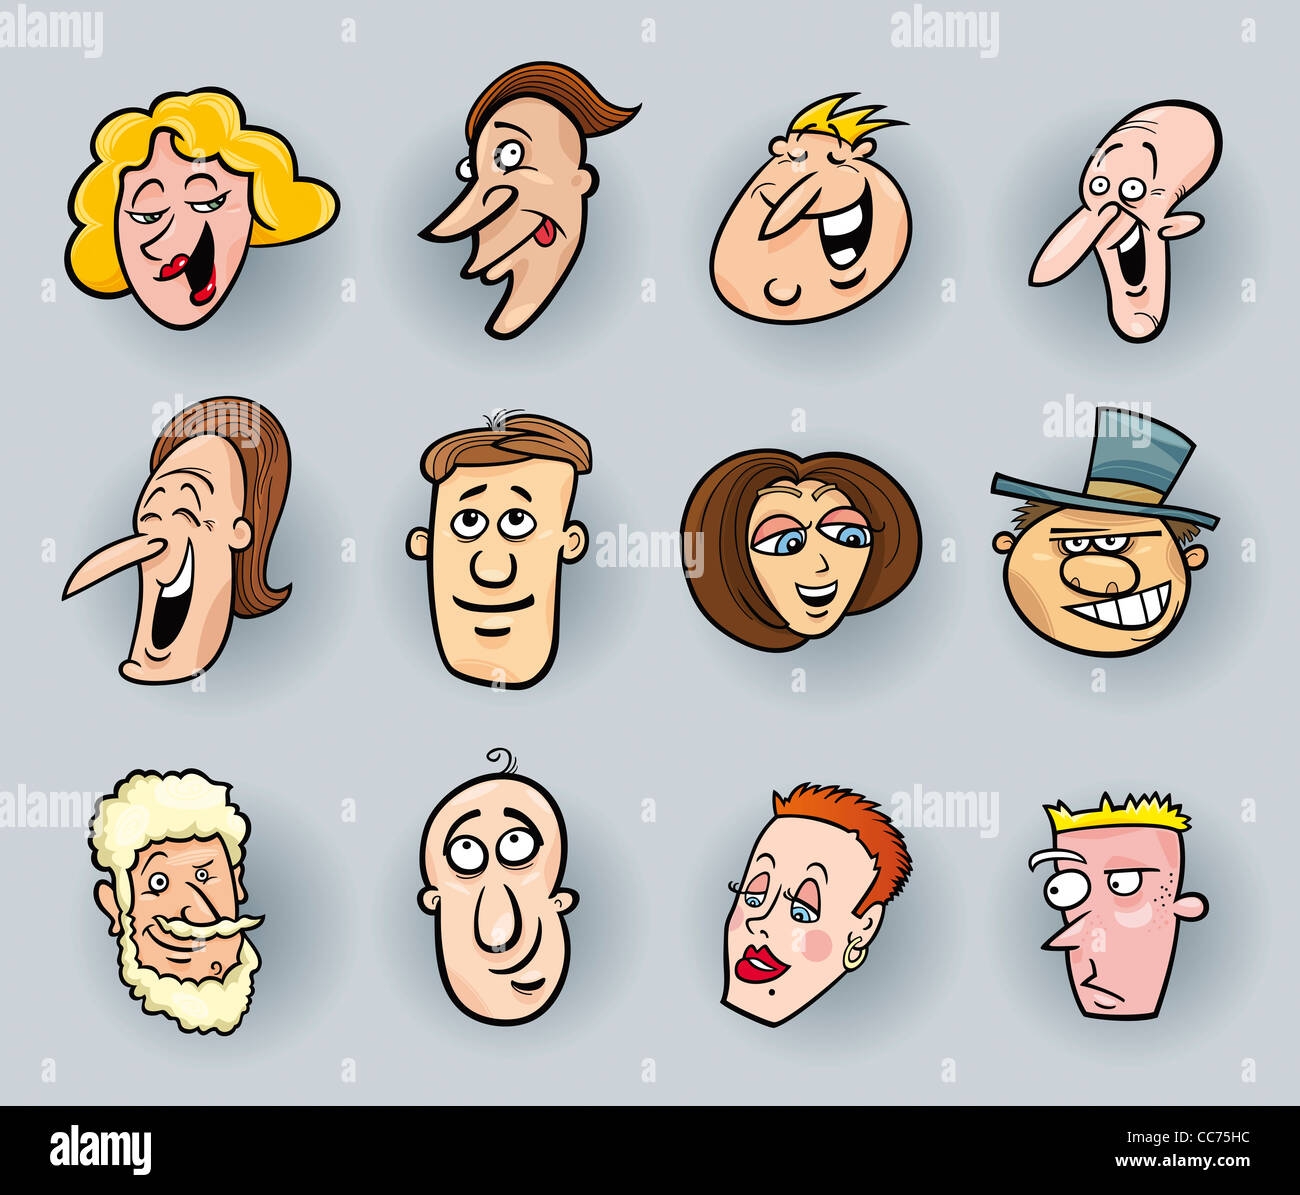 cartoon illustration of funny people faces set Stock Photo